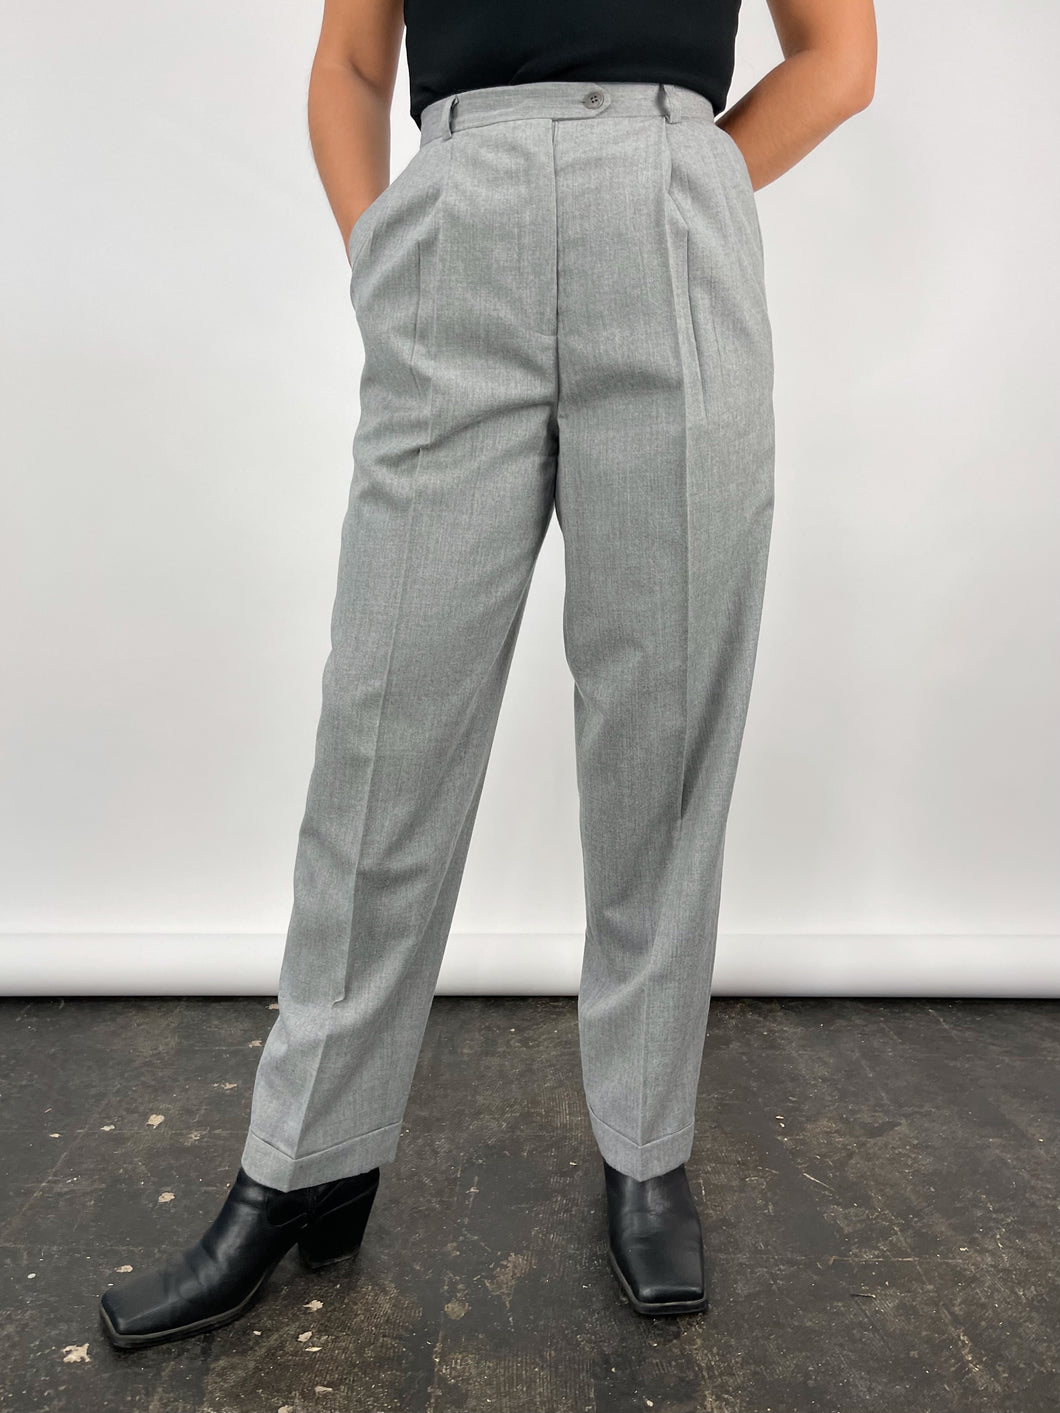 90's Grey Wool High Waisted Trousers (W28